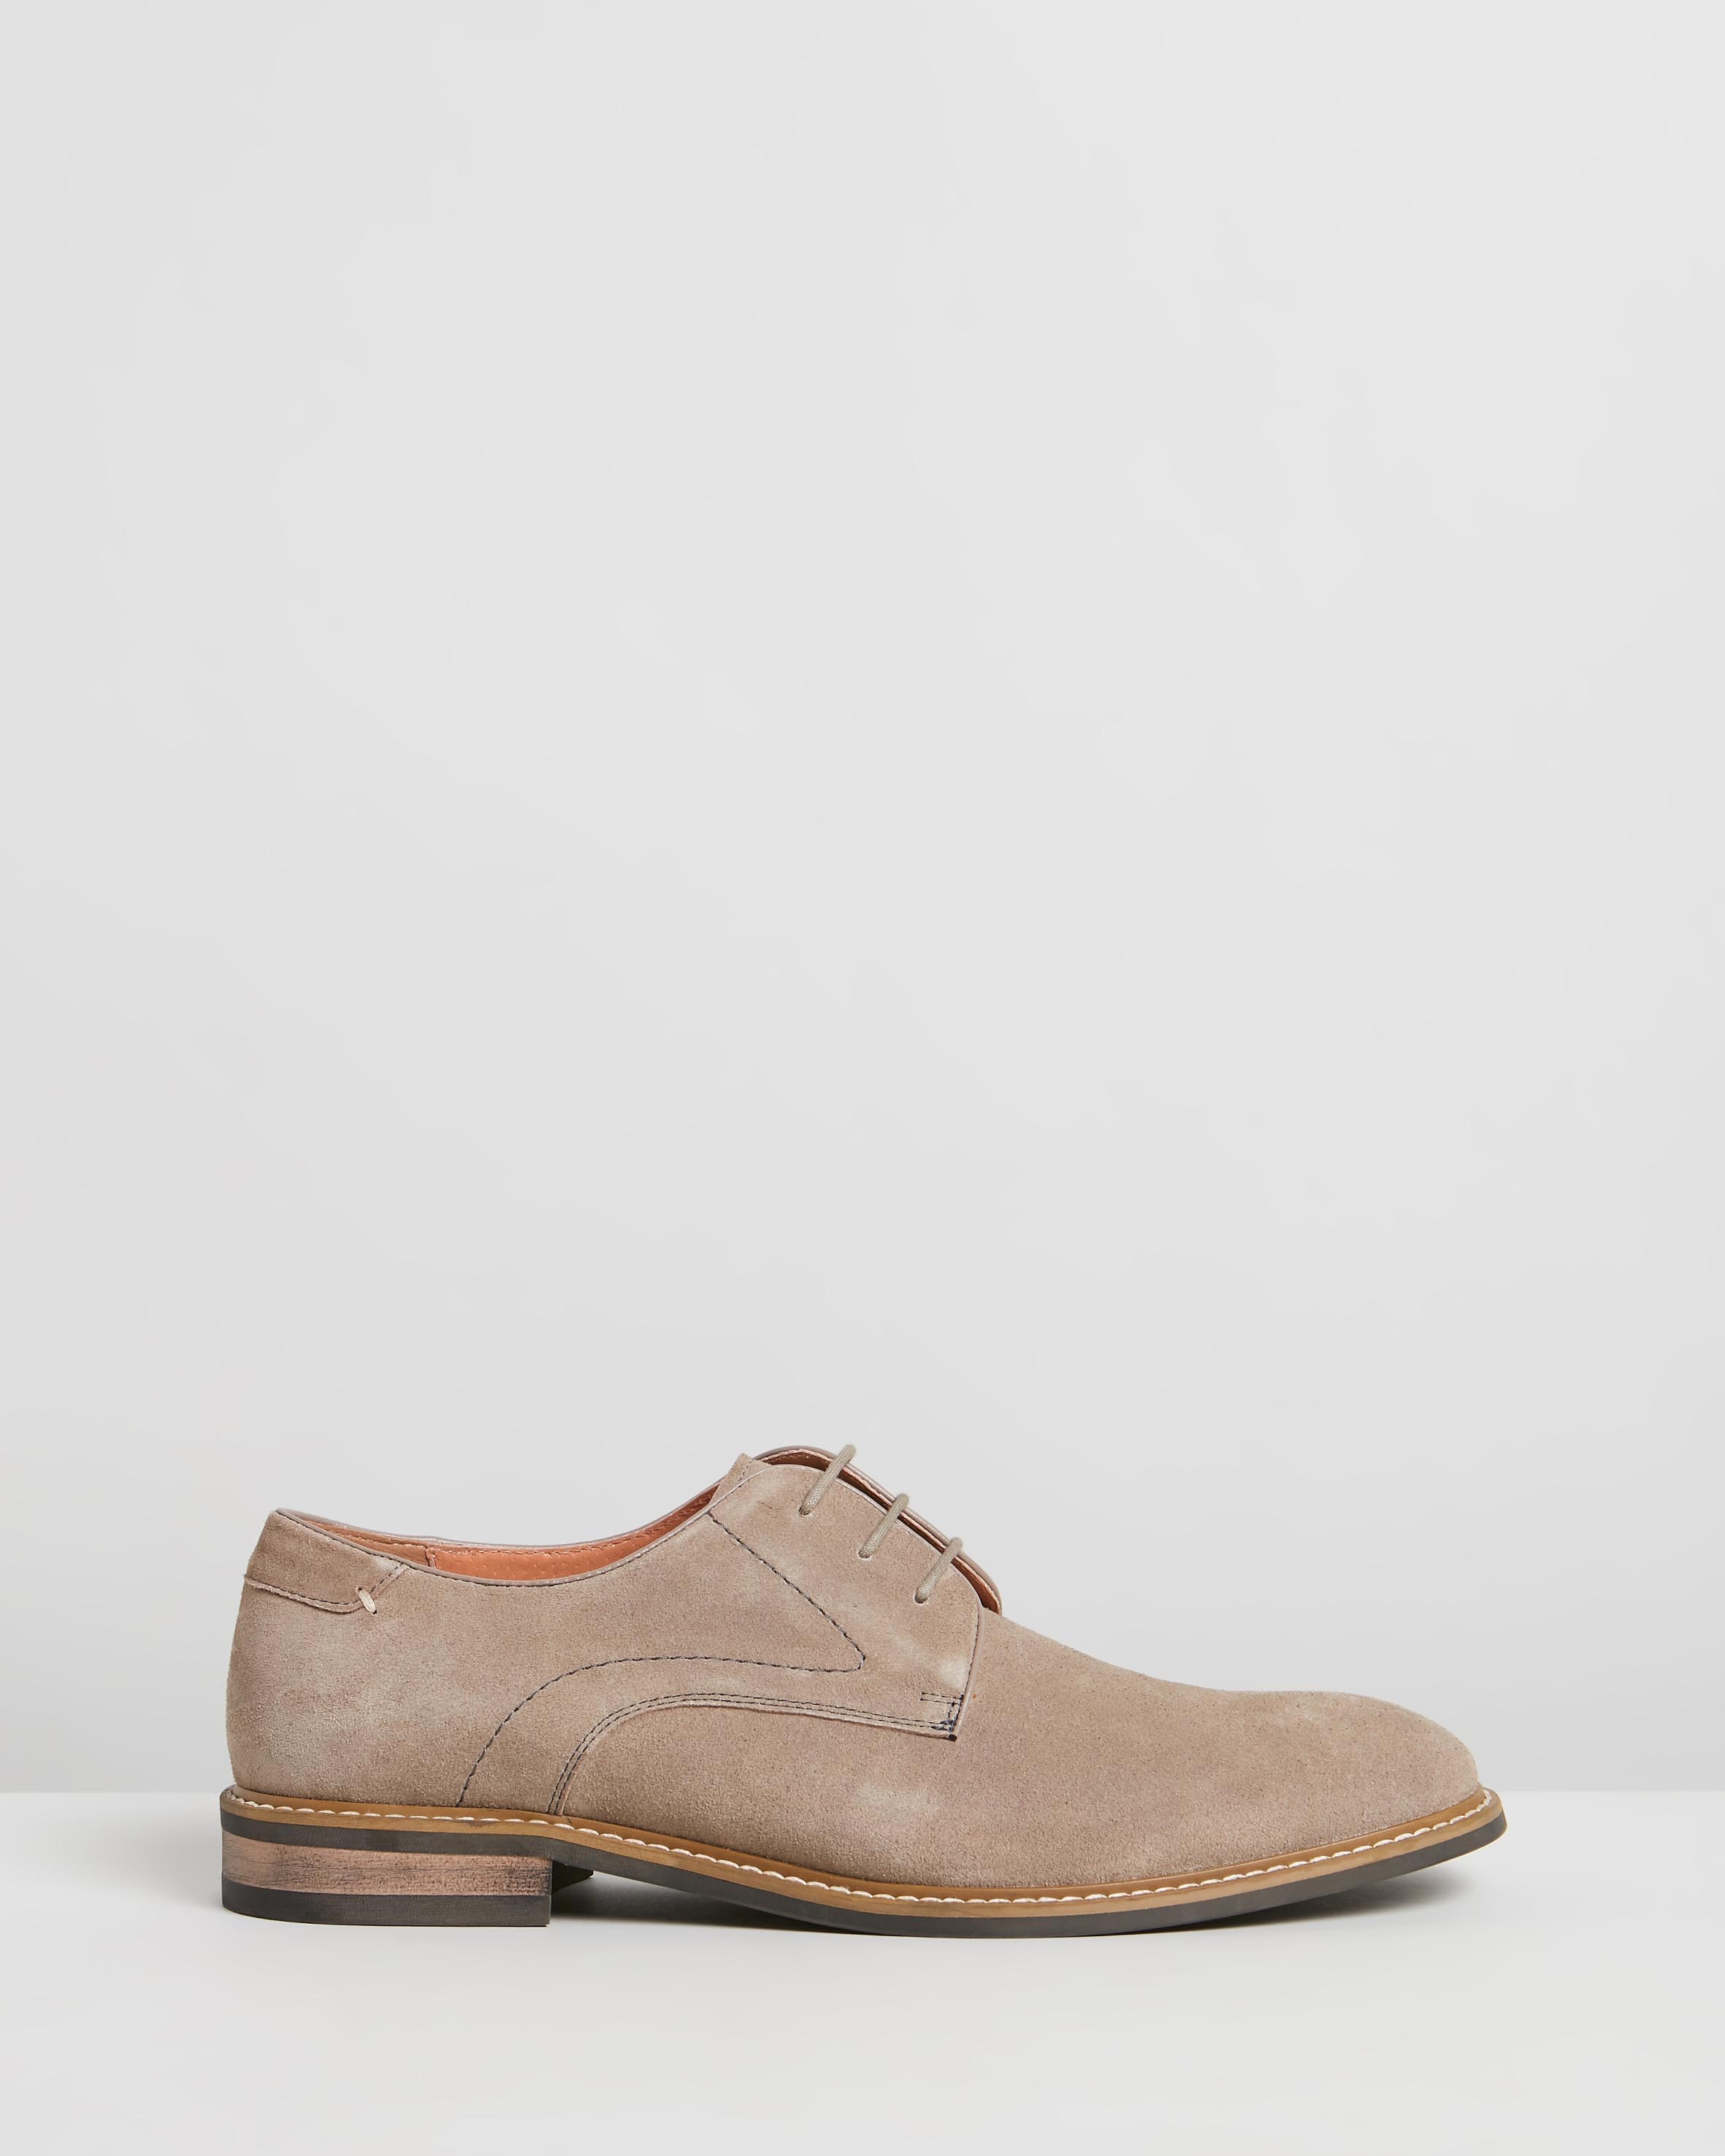 Silva Suede Derby Taupe by Double Oak Mills | ShoeSales